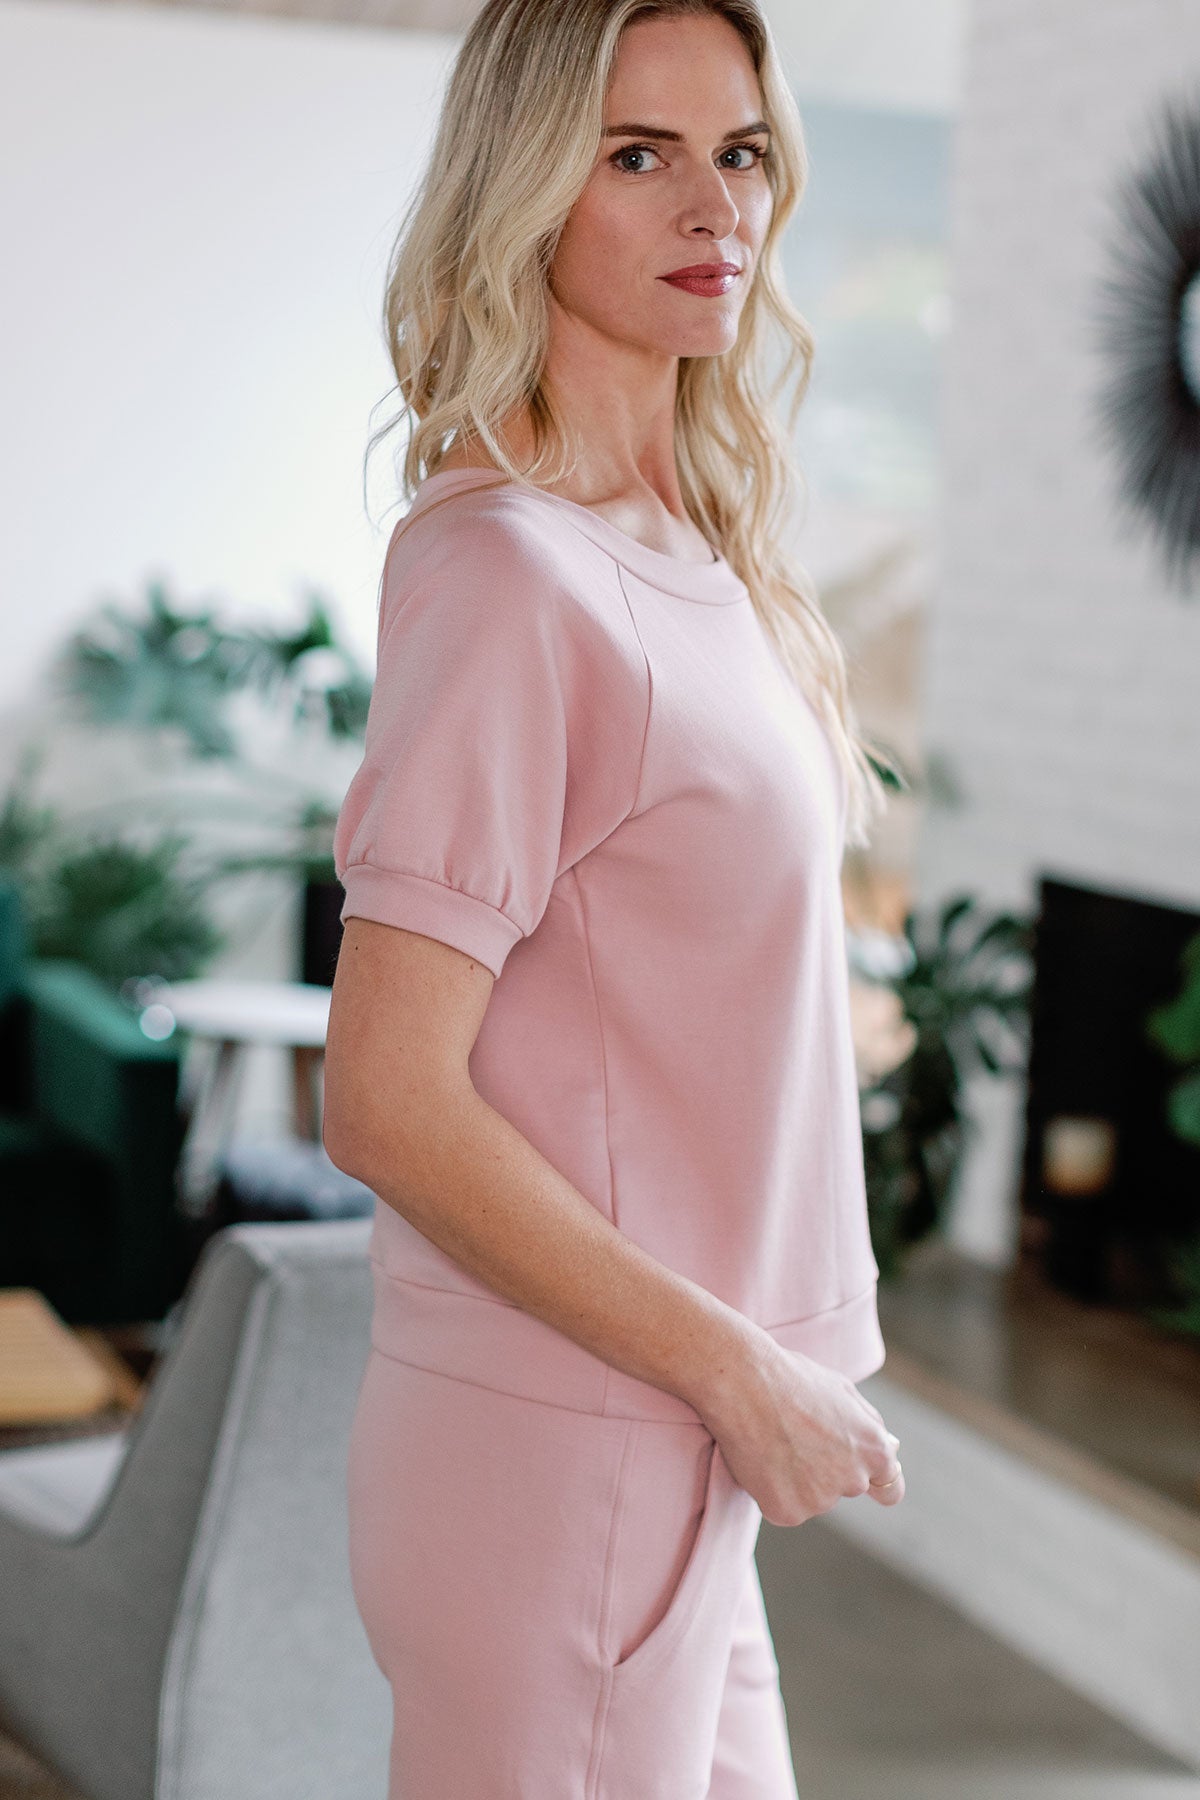 A woman standing facing to the side, looking towards the camera with hands at her waistline, wearing Yala Berkeley Puff Short Sleeve Bamboo and Organic Cotton Raglan Sweatshirt Top in Lotus Pink